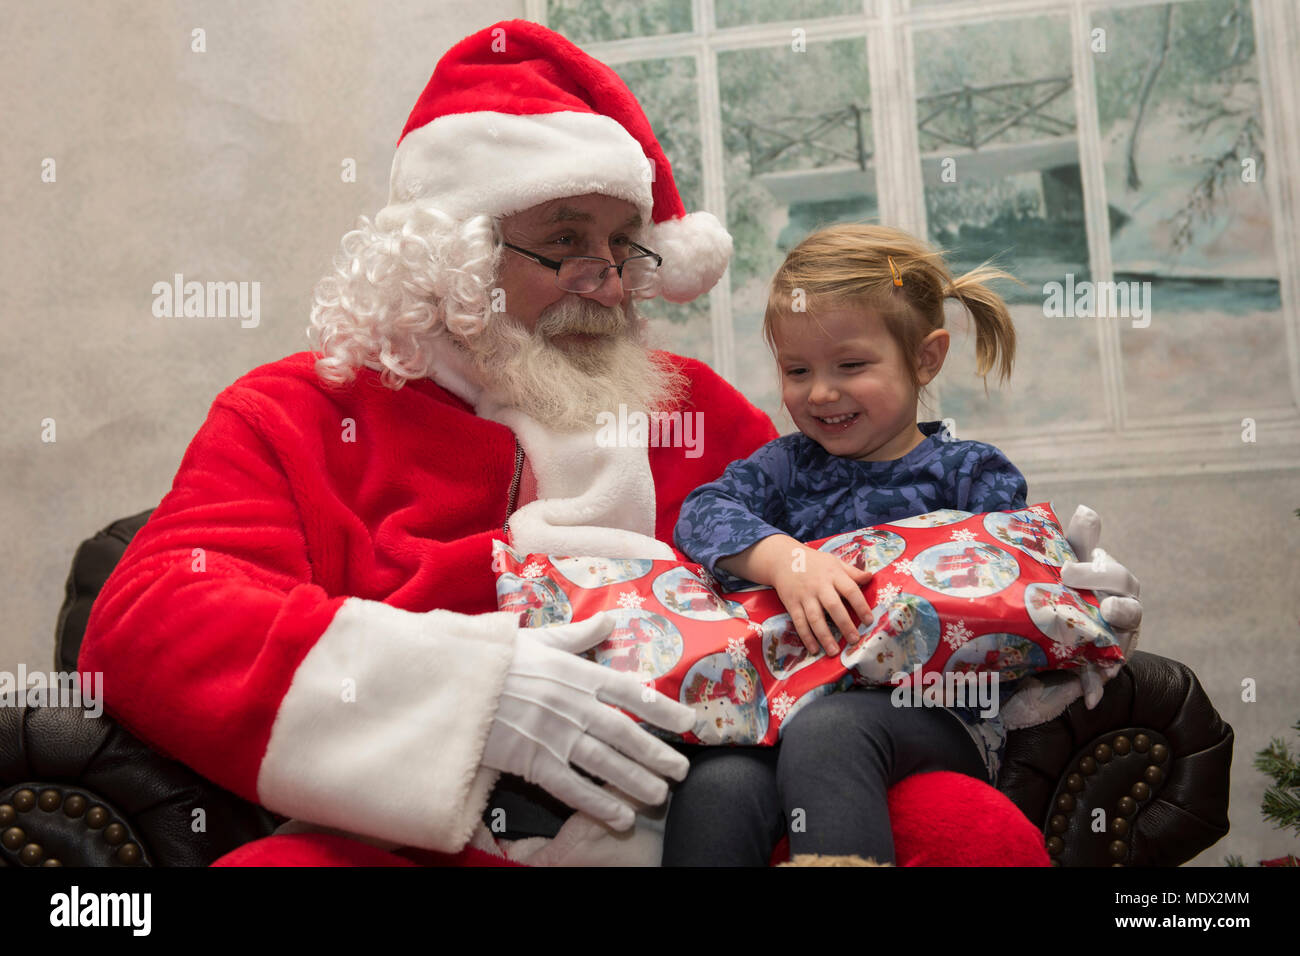 For some kids, sitting with Santa needs to be quiet time (PHOTOS